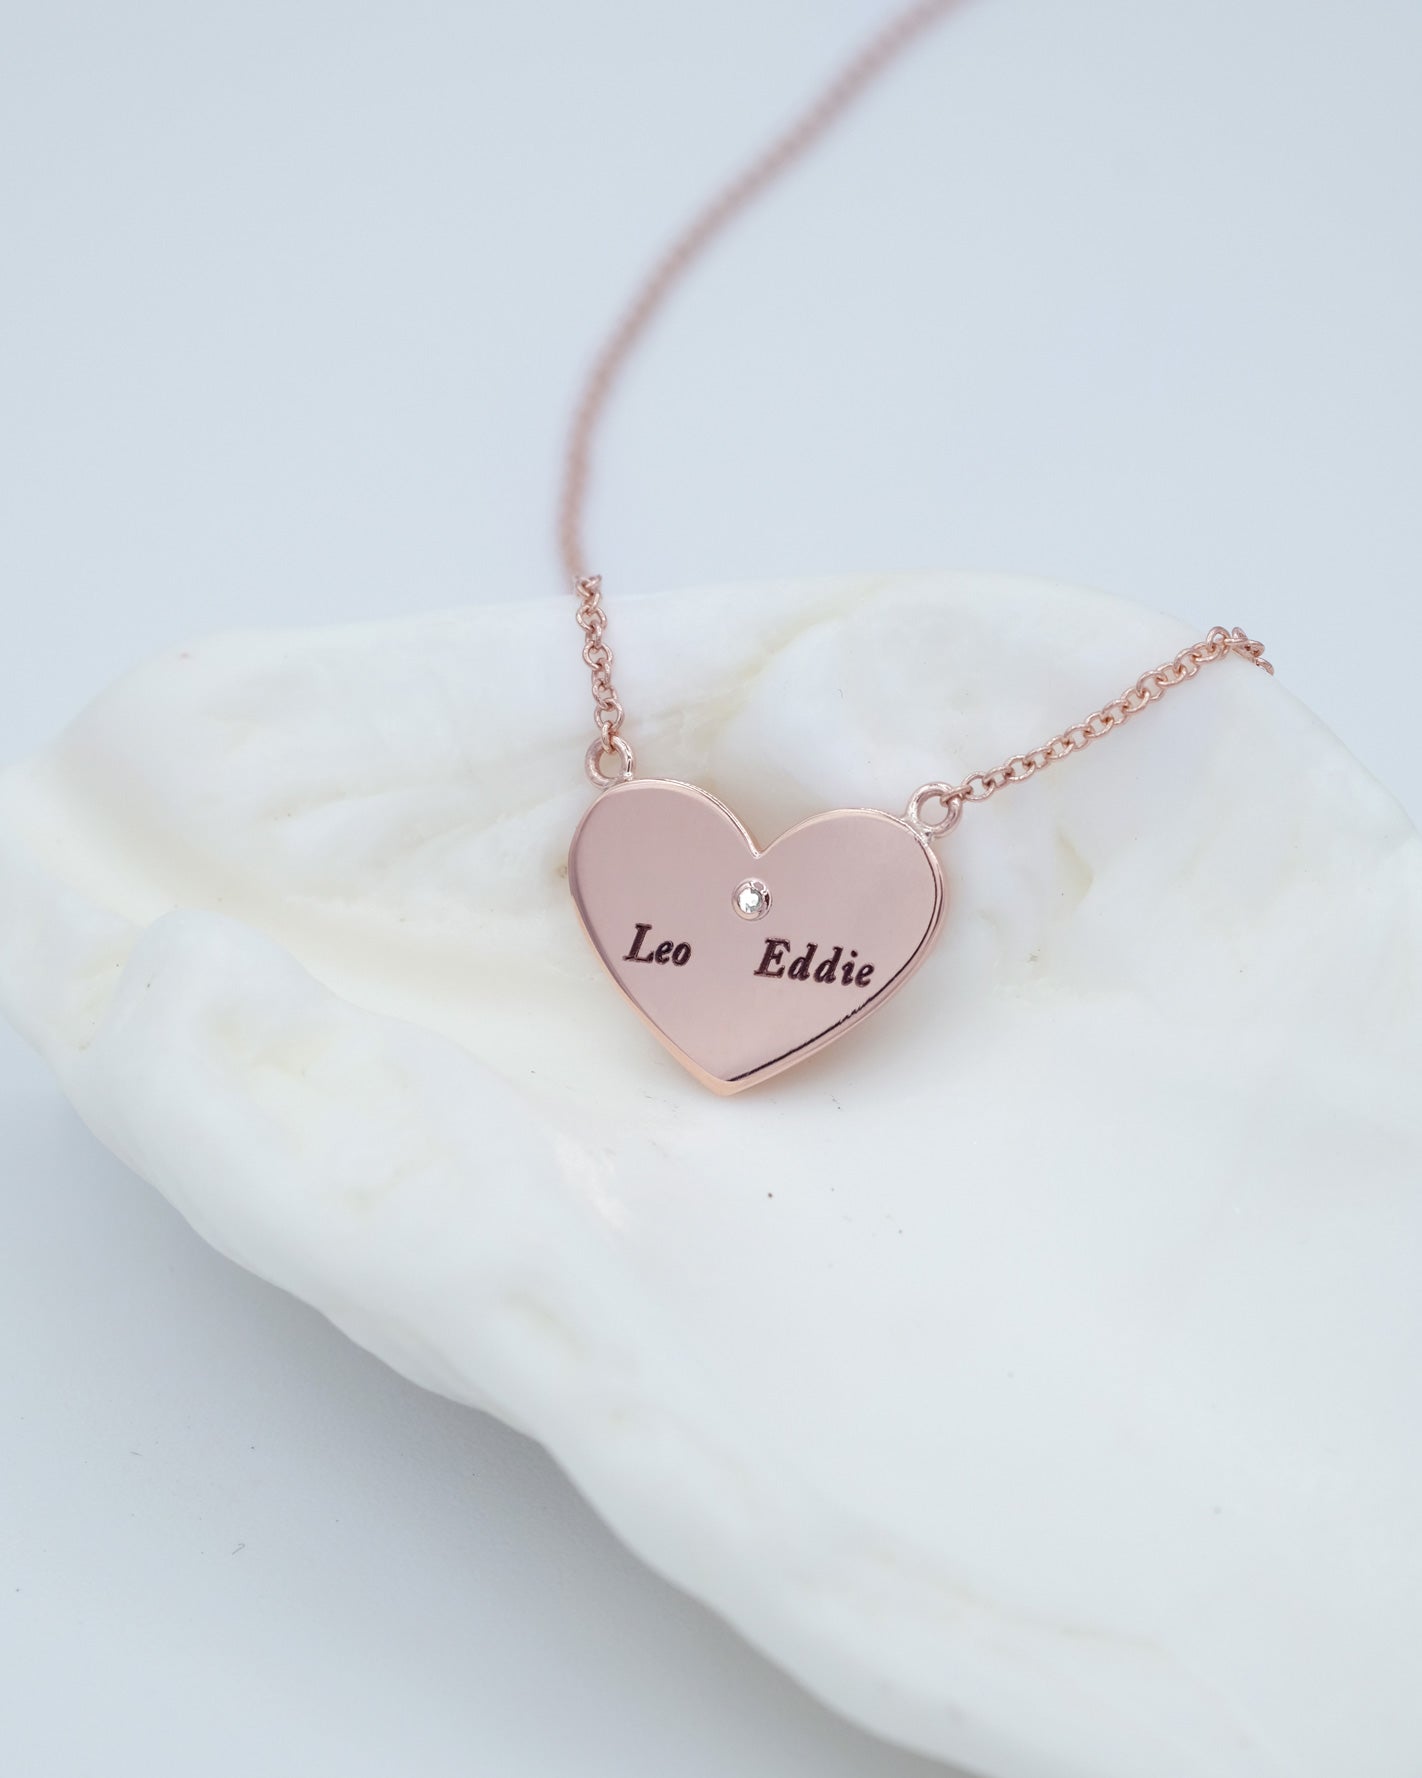 Footprints Heart Necklace with a Diamond